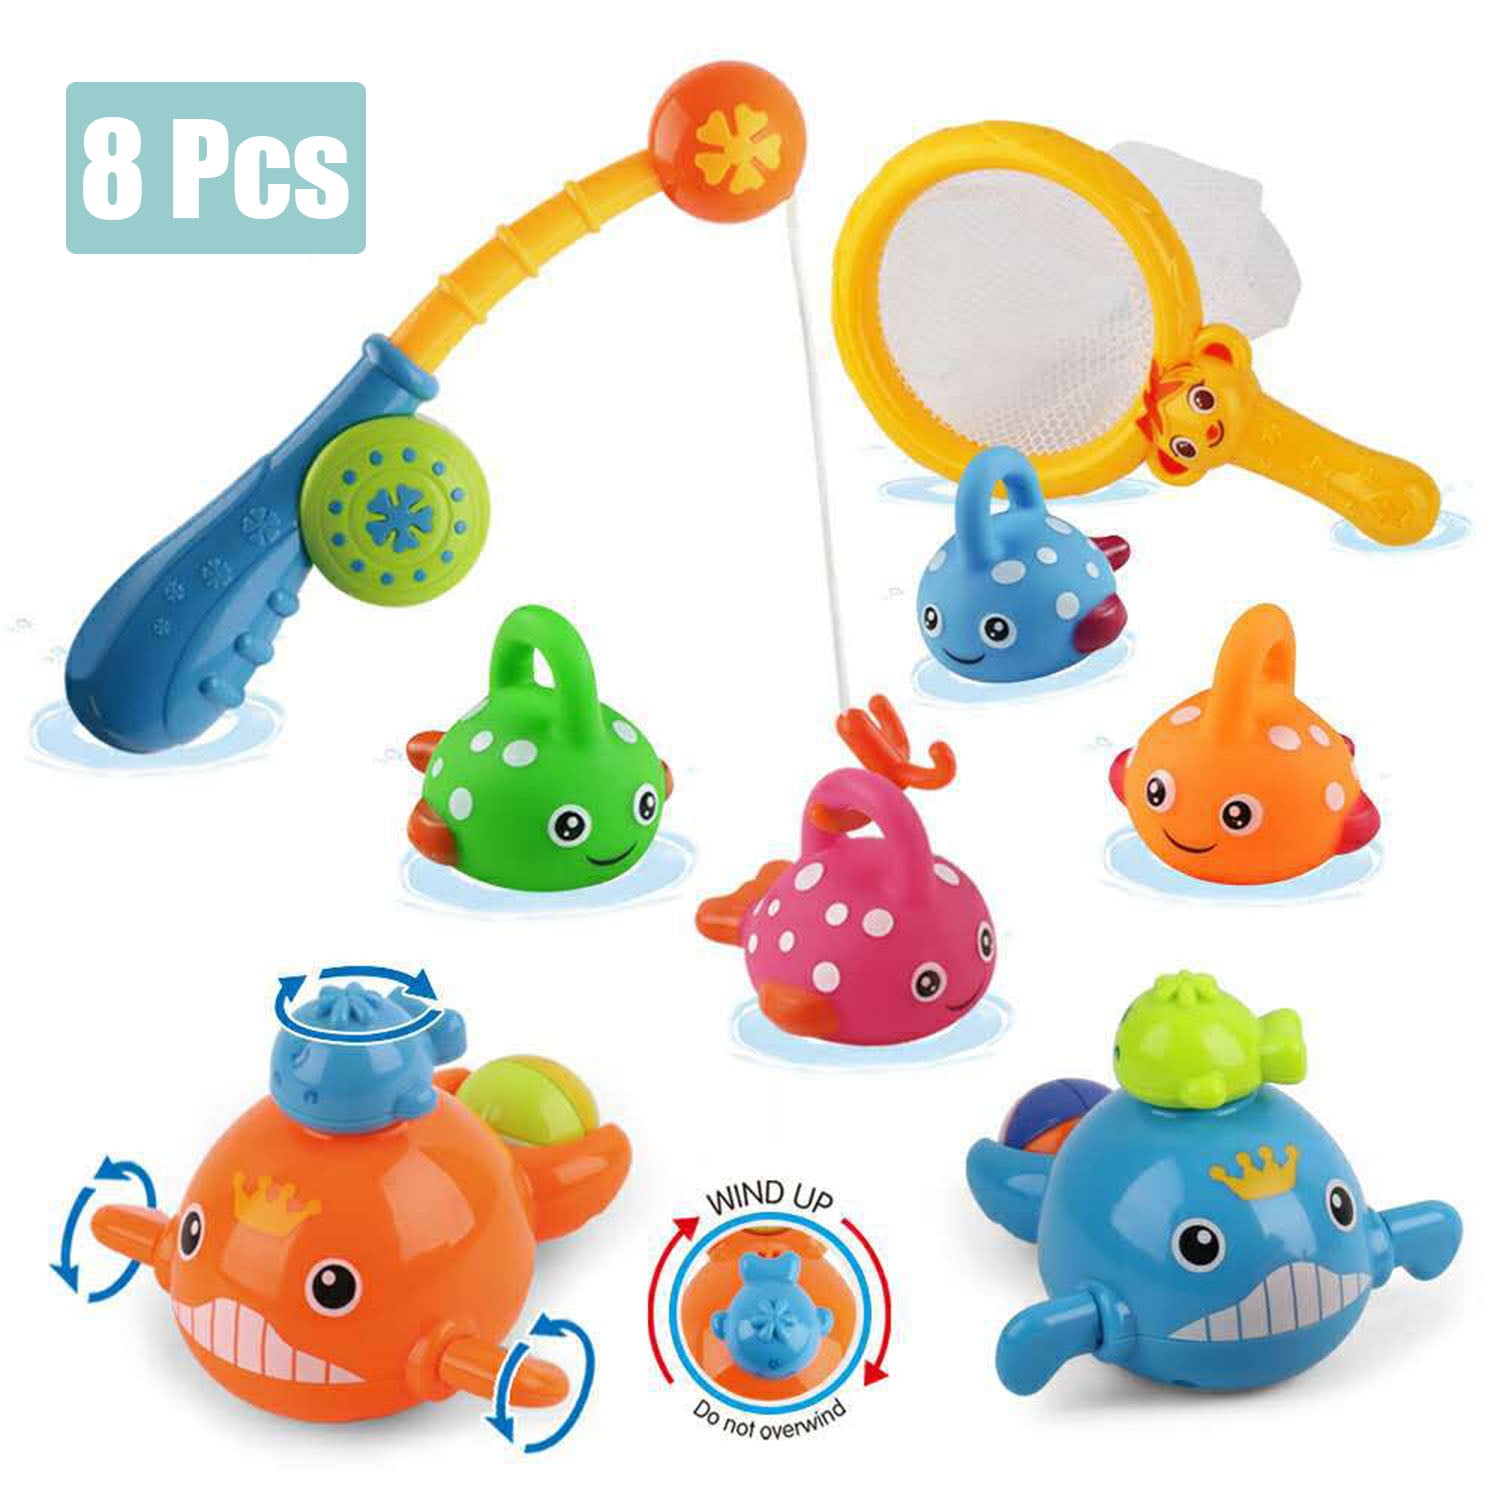 2 PCS WIND UP AIR INFLATION Fishing Game Set Bath Toy Fish Catch 